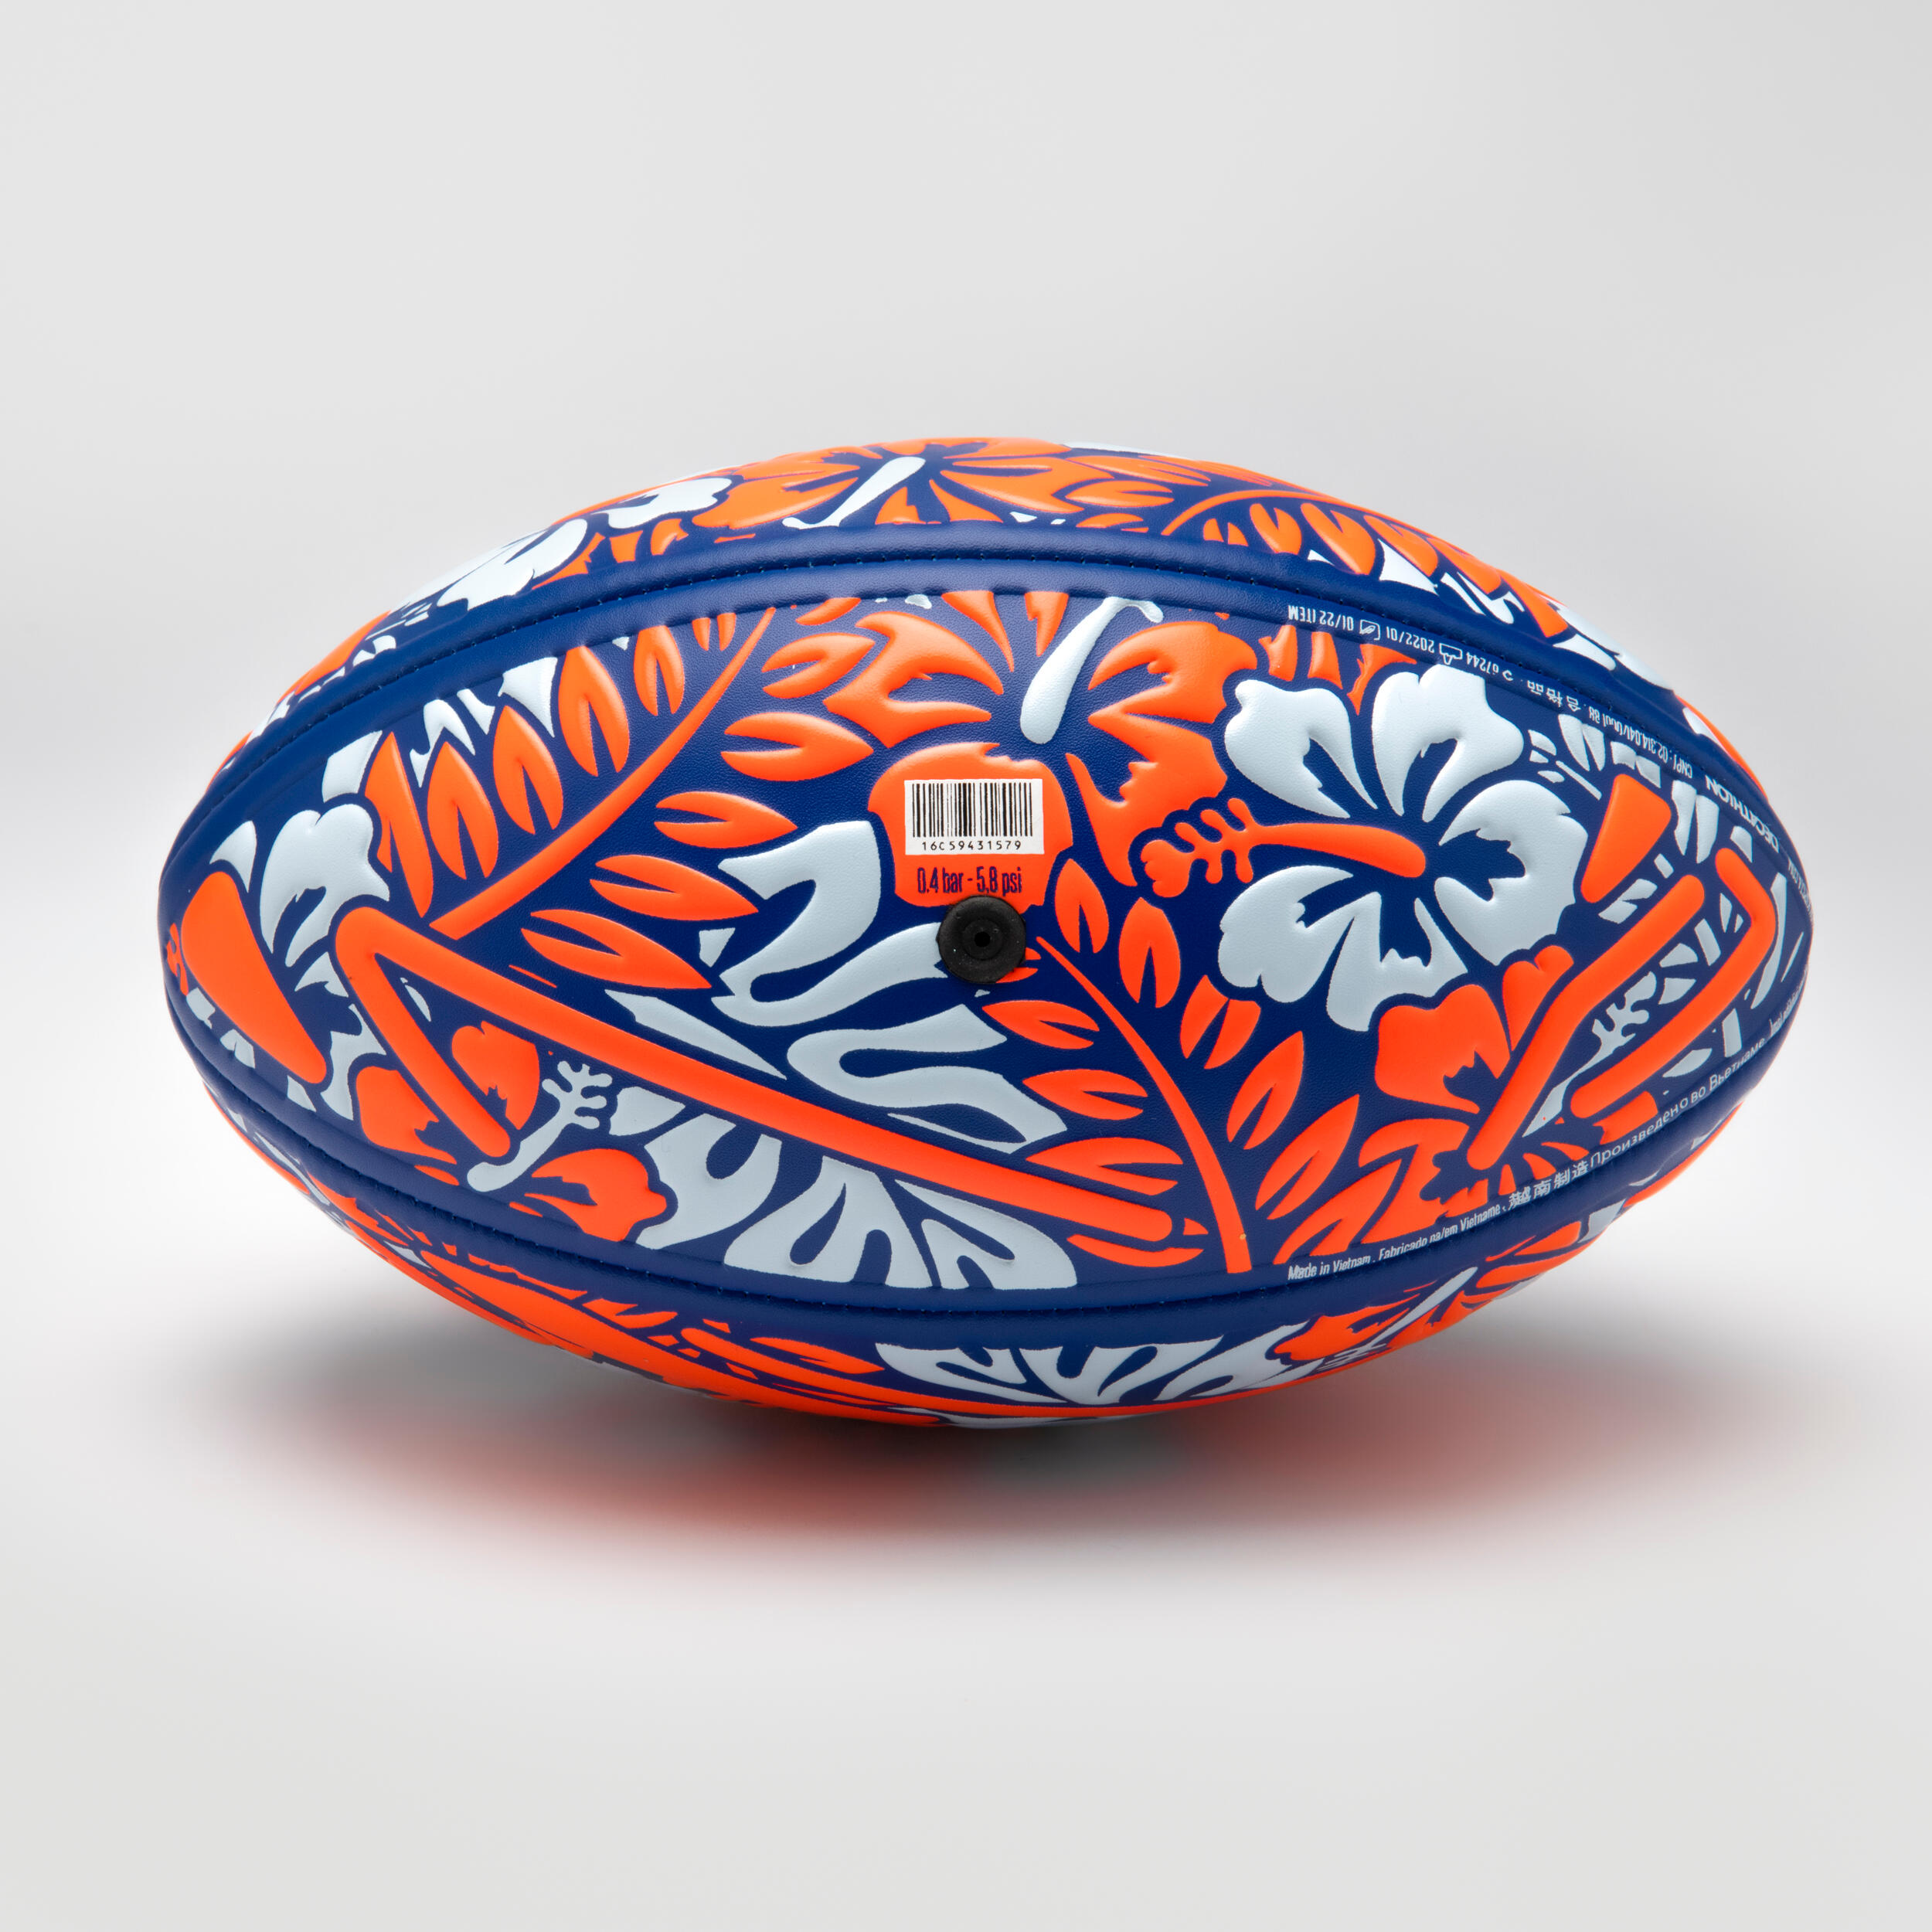 Beach Rugby Ball R100 Midi Floral Size 1 - Blue/Red 2/5